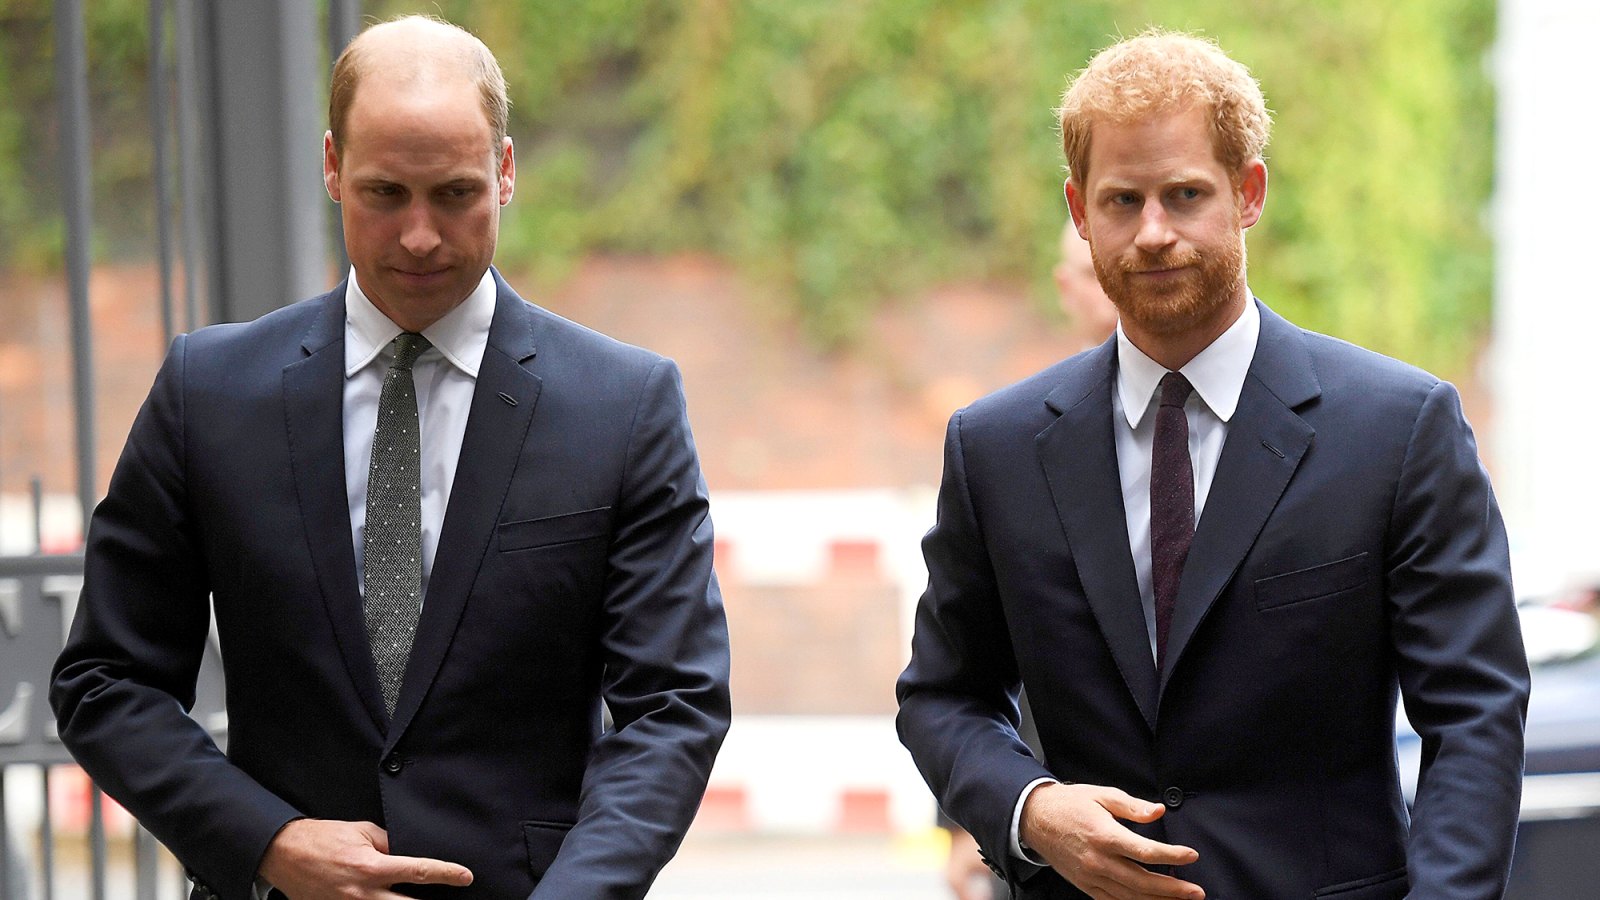 Prince Harry Refers to Prince William as His ‘Archnemesis’ in ‘Spare’ Memoir, Says Brothers Had a ‘Million Physical Fights in Our Lives’